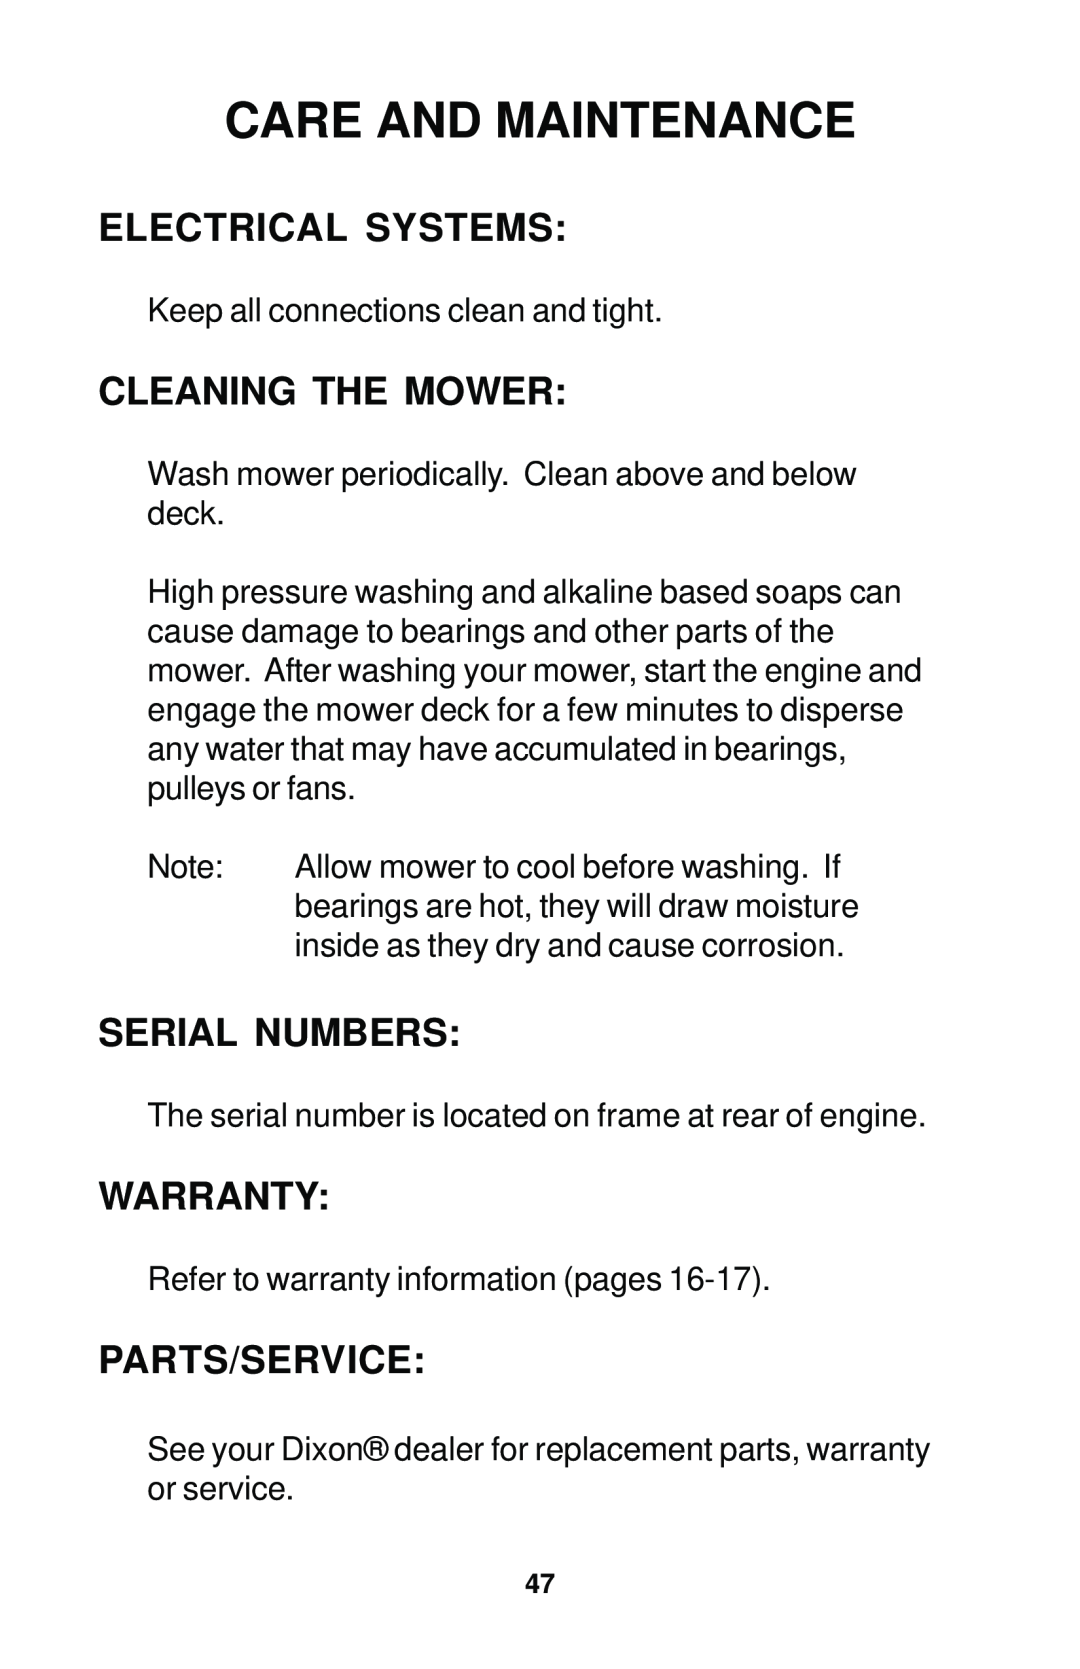 Dixon 42, 44, 50, 44 MAG, 50 MAG manual Electrical Systems, Cleaning The Mower, Serial Numbers, Warranty, Parts/Service 